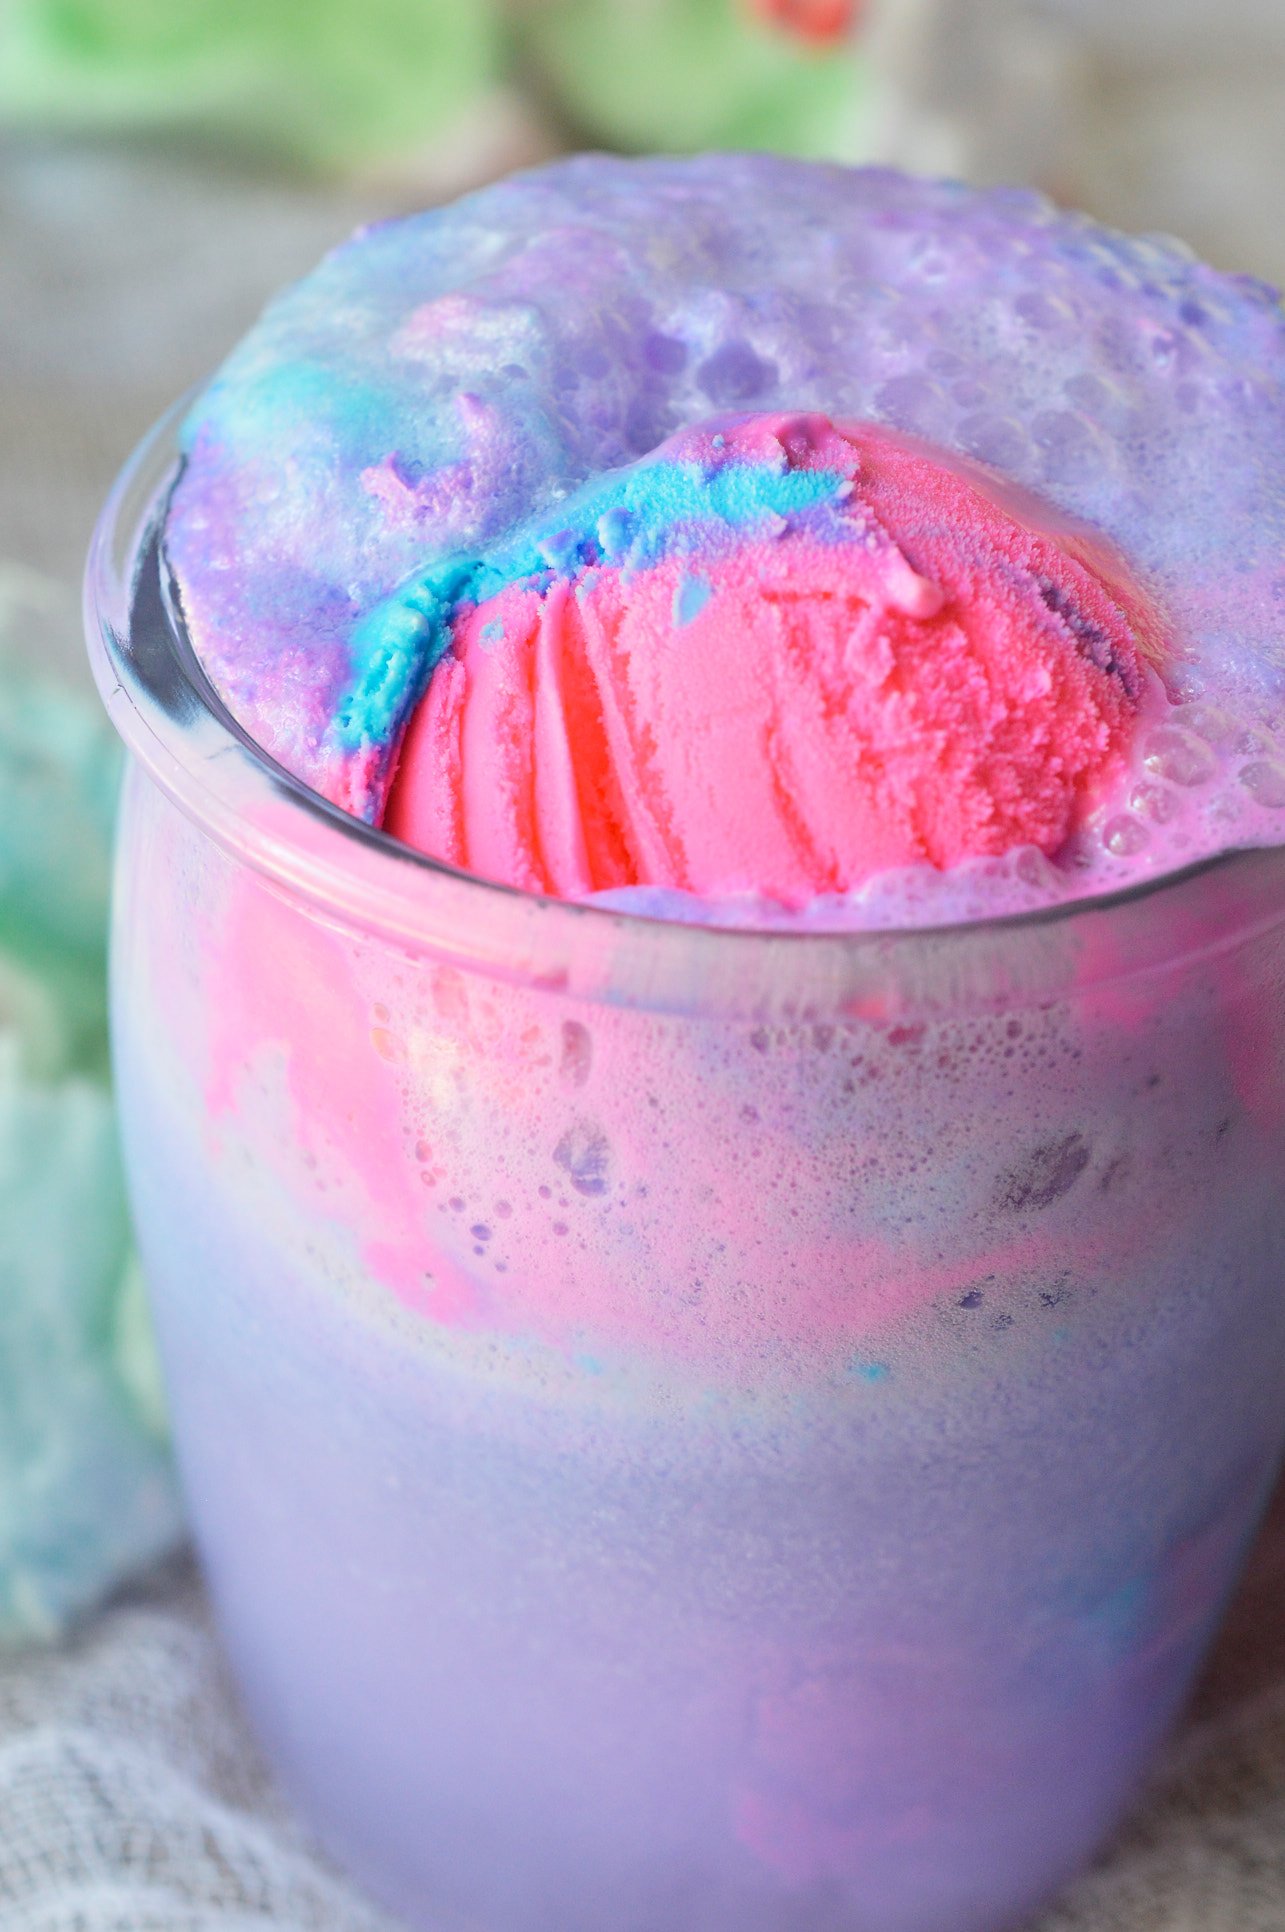 Get the party started with thisÂ Cotton Candy Unicorn Party Punch and Unicorn Ice Cream Cake! The punch recipe is made simply with 2 ingredients and the ice cream cake takes just minutes to decorate. The kids will love this fun and colorful drink!